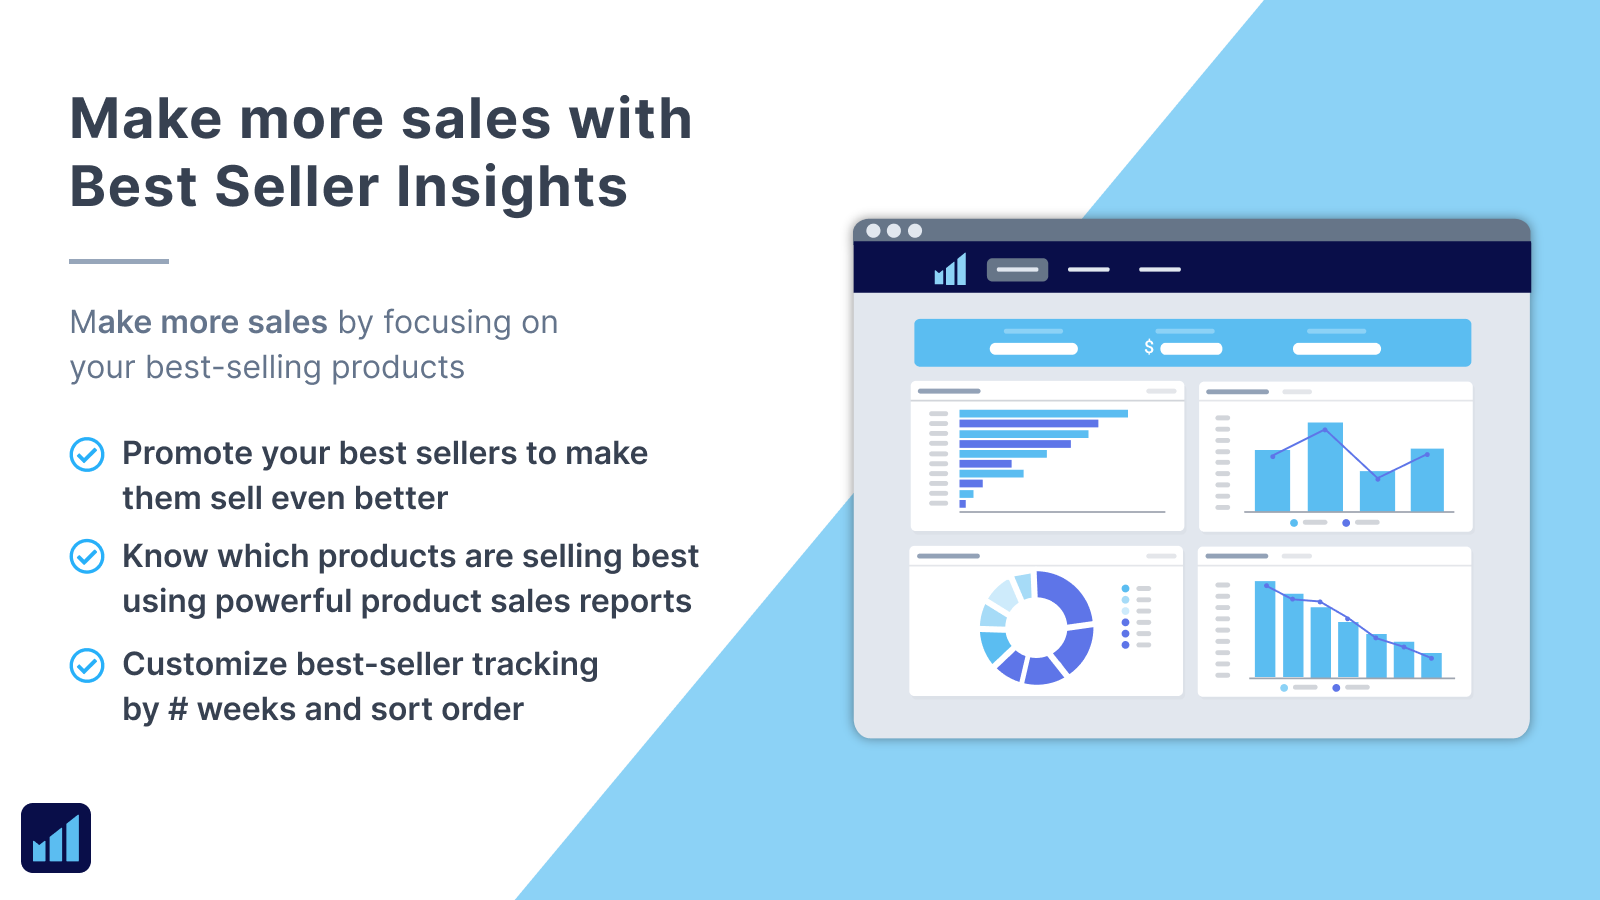 Make more sales with Best Seller Insights